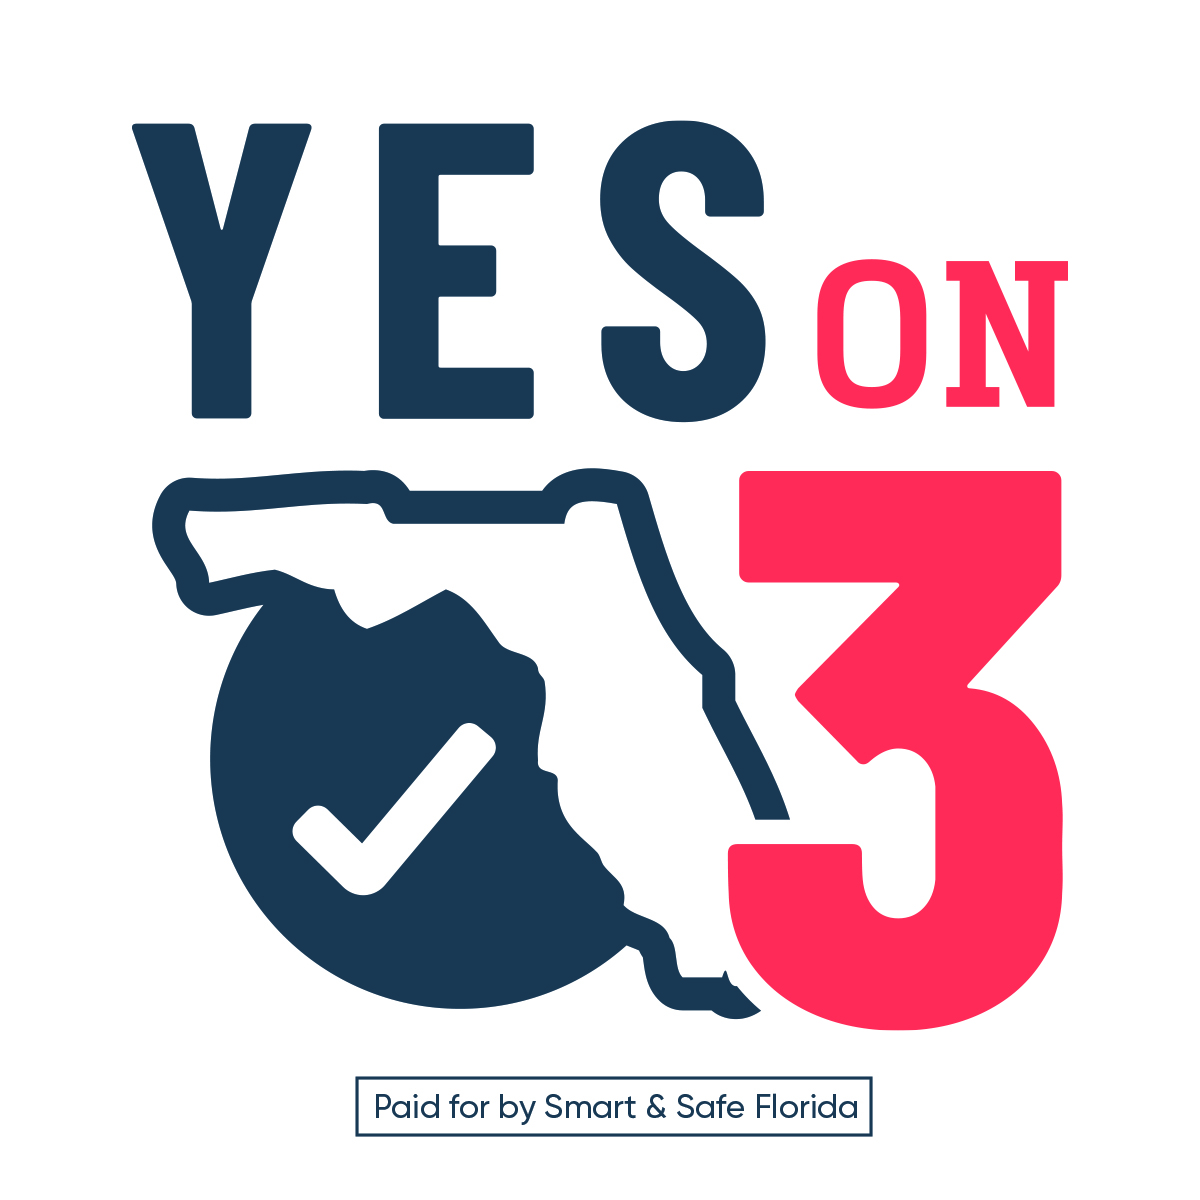 It’s go time! The Florida Supreme Court has done the right thing and now voters will get the chance to vote YES on Amendment 3…safety, freedom and adult use of cannabis for Florida. #YesOn3 #Smart&SafeFL @SmartandSafeFl